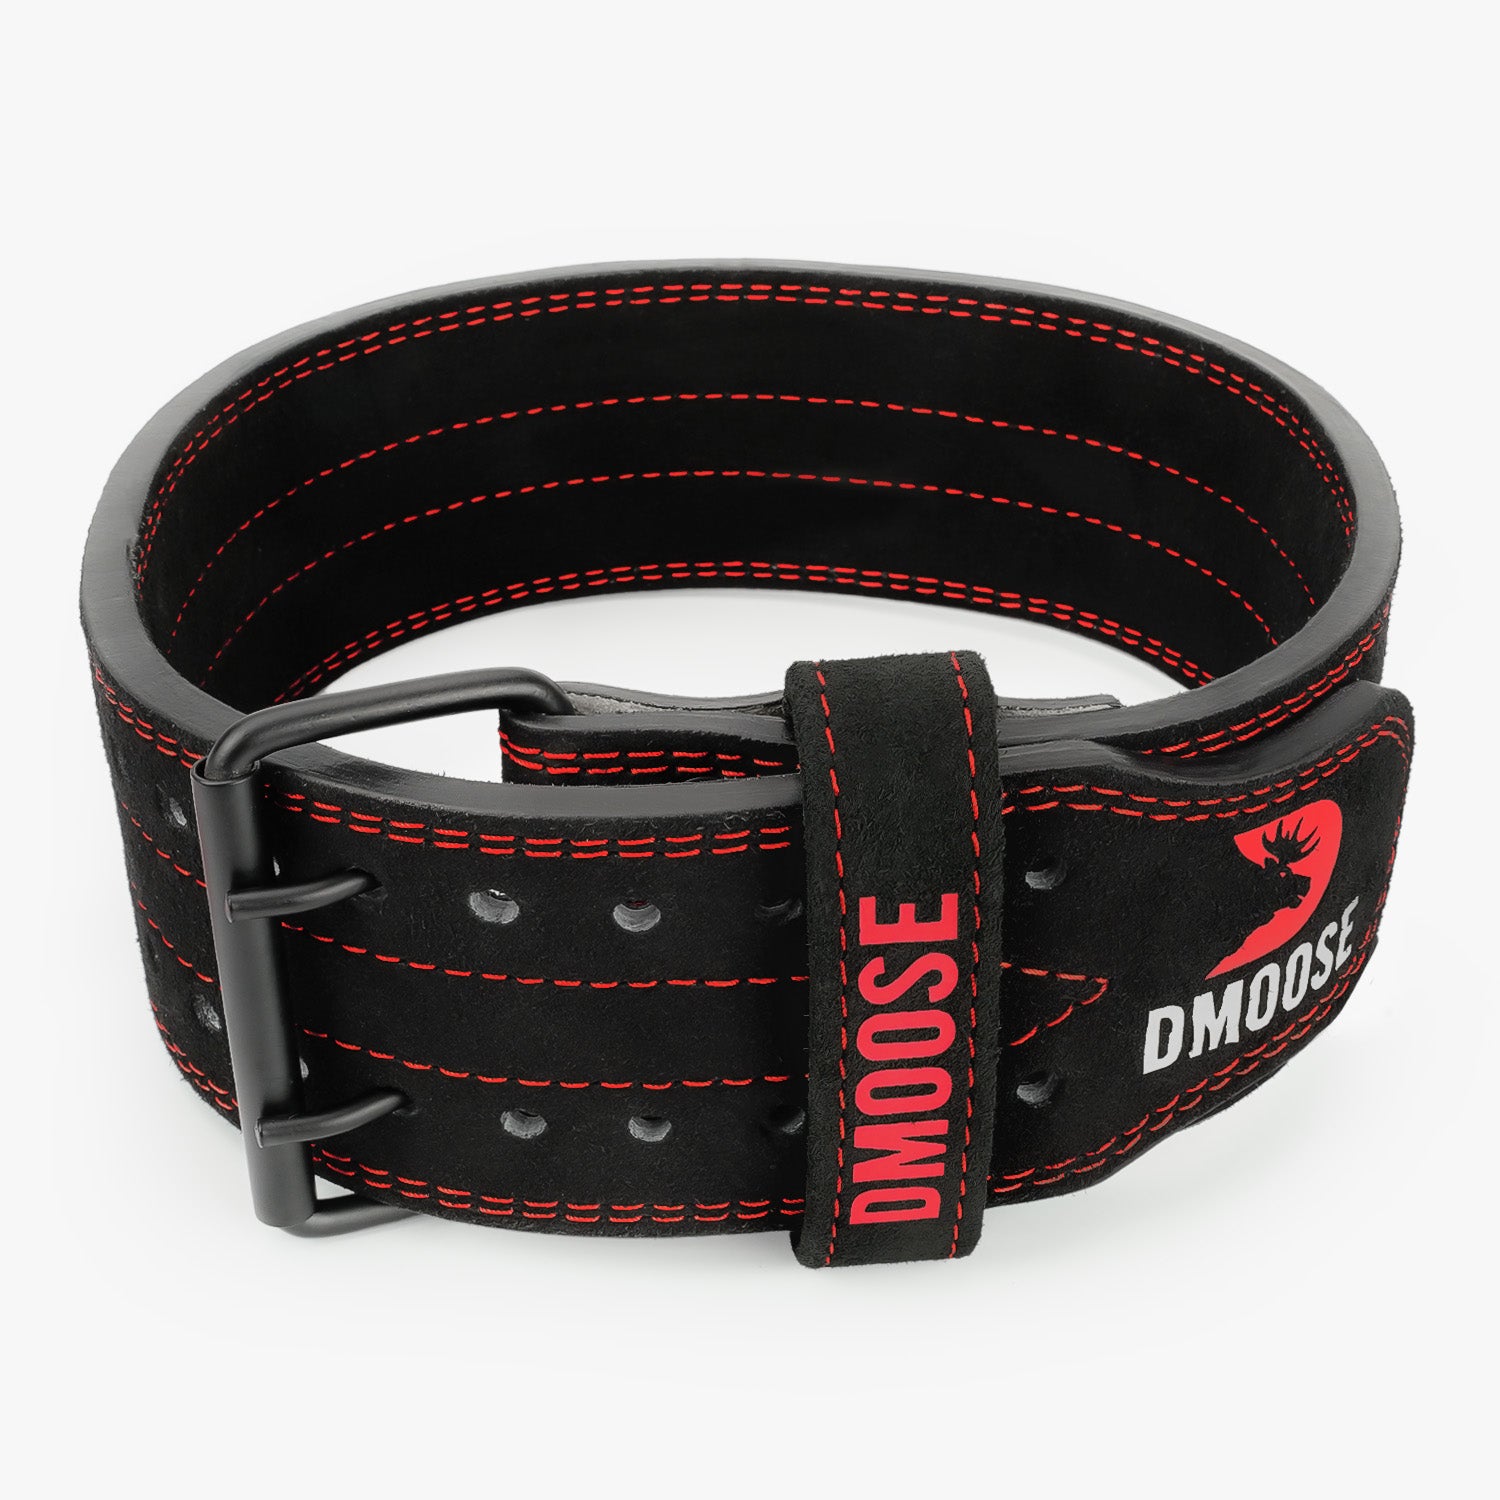 DMoose 10mm Weightlifting Buckle Belt - Elevate Your Lifts!